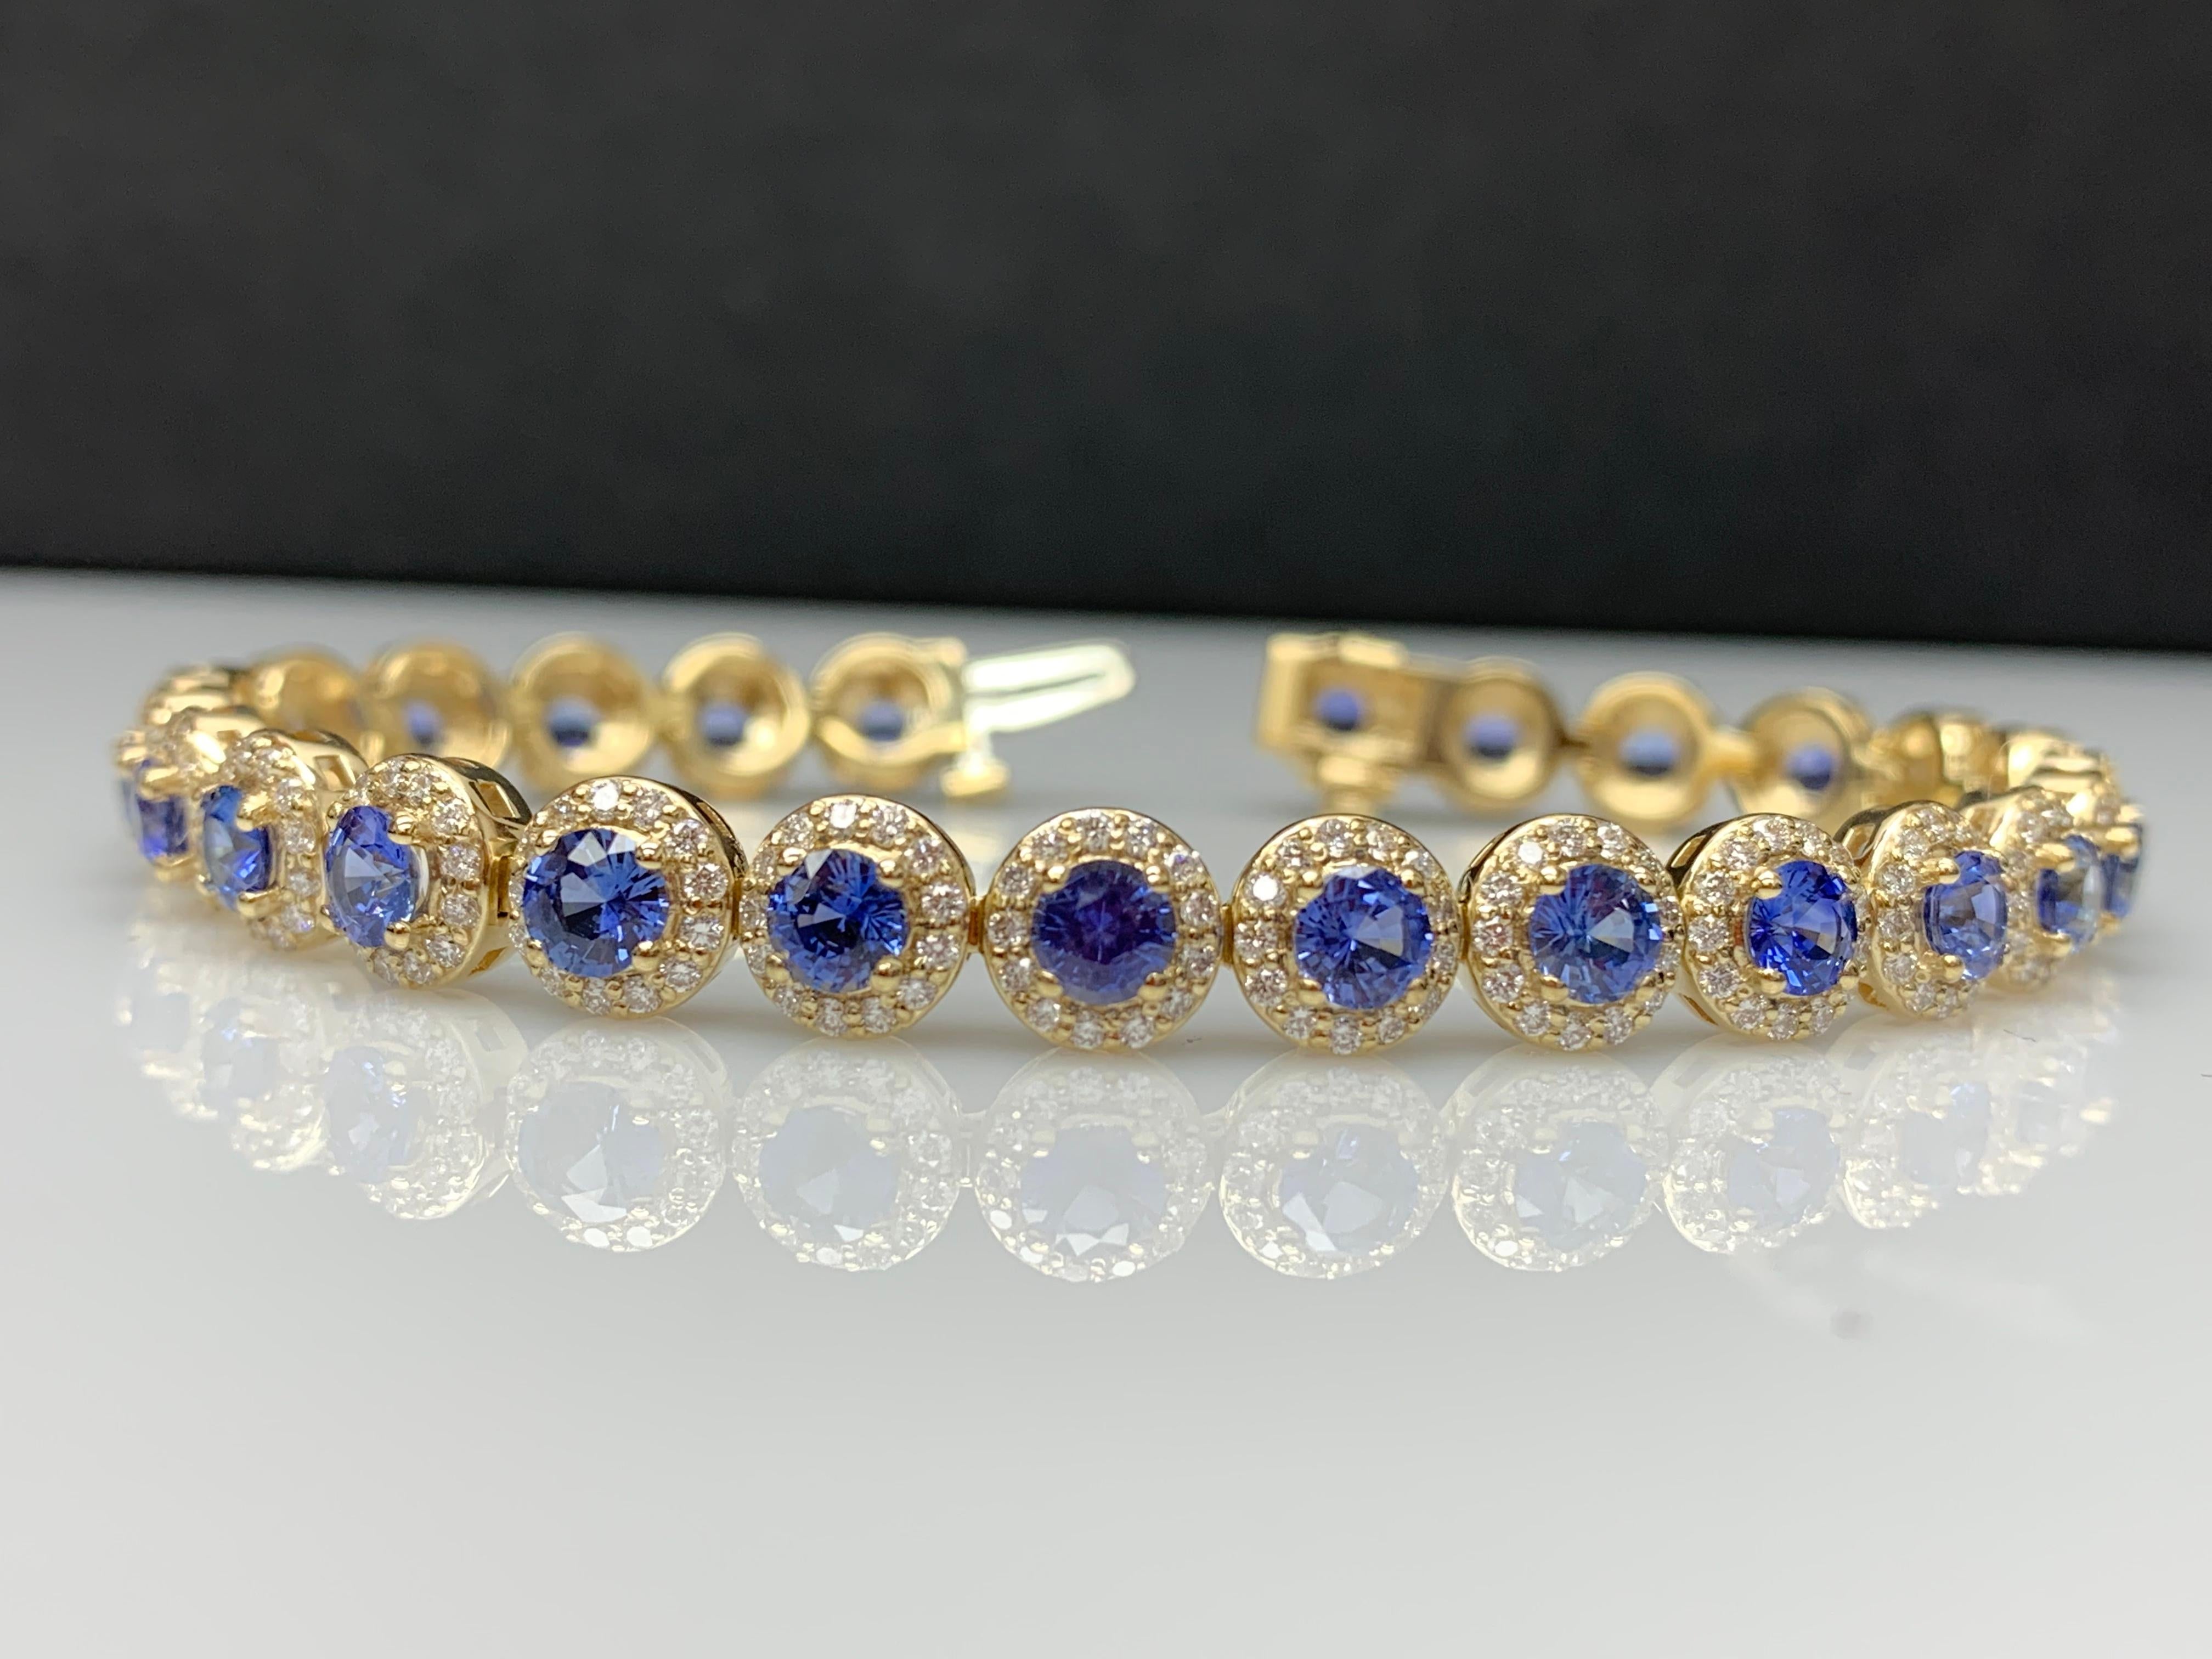 7.47 Carat Blue Sapphire and Diamond Halo Tennis Bracelet in 14k Yellow Gold For Sale 4